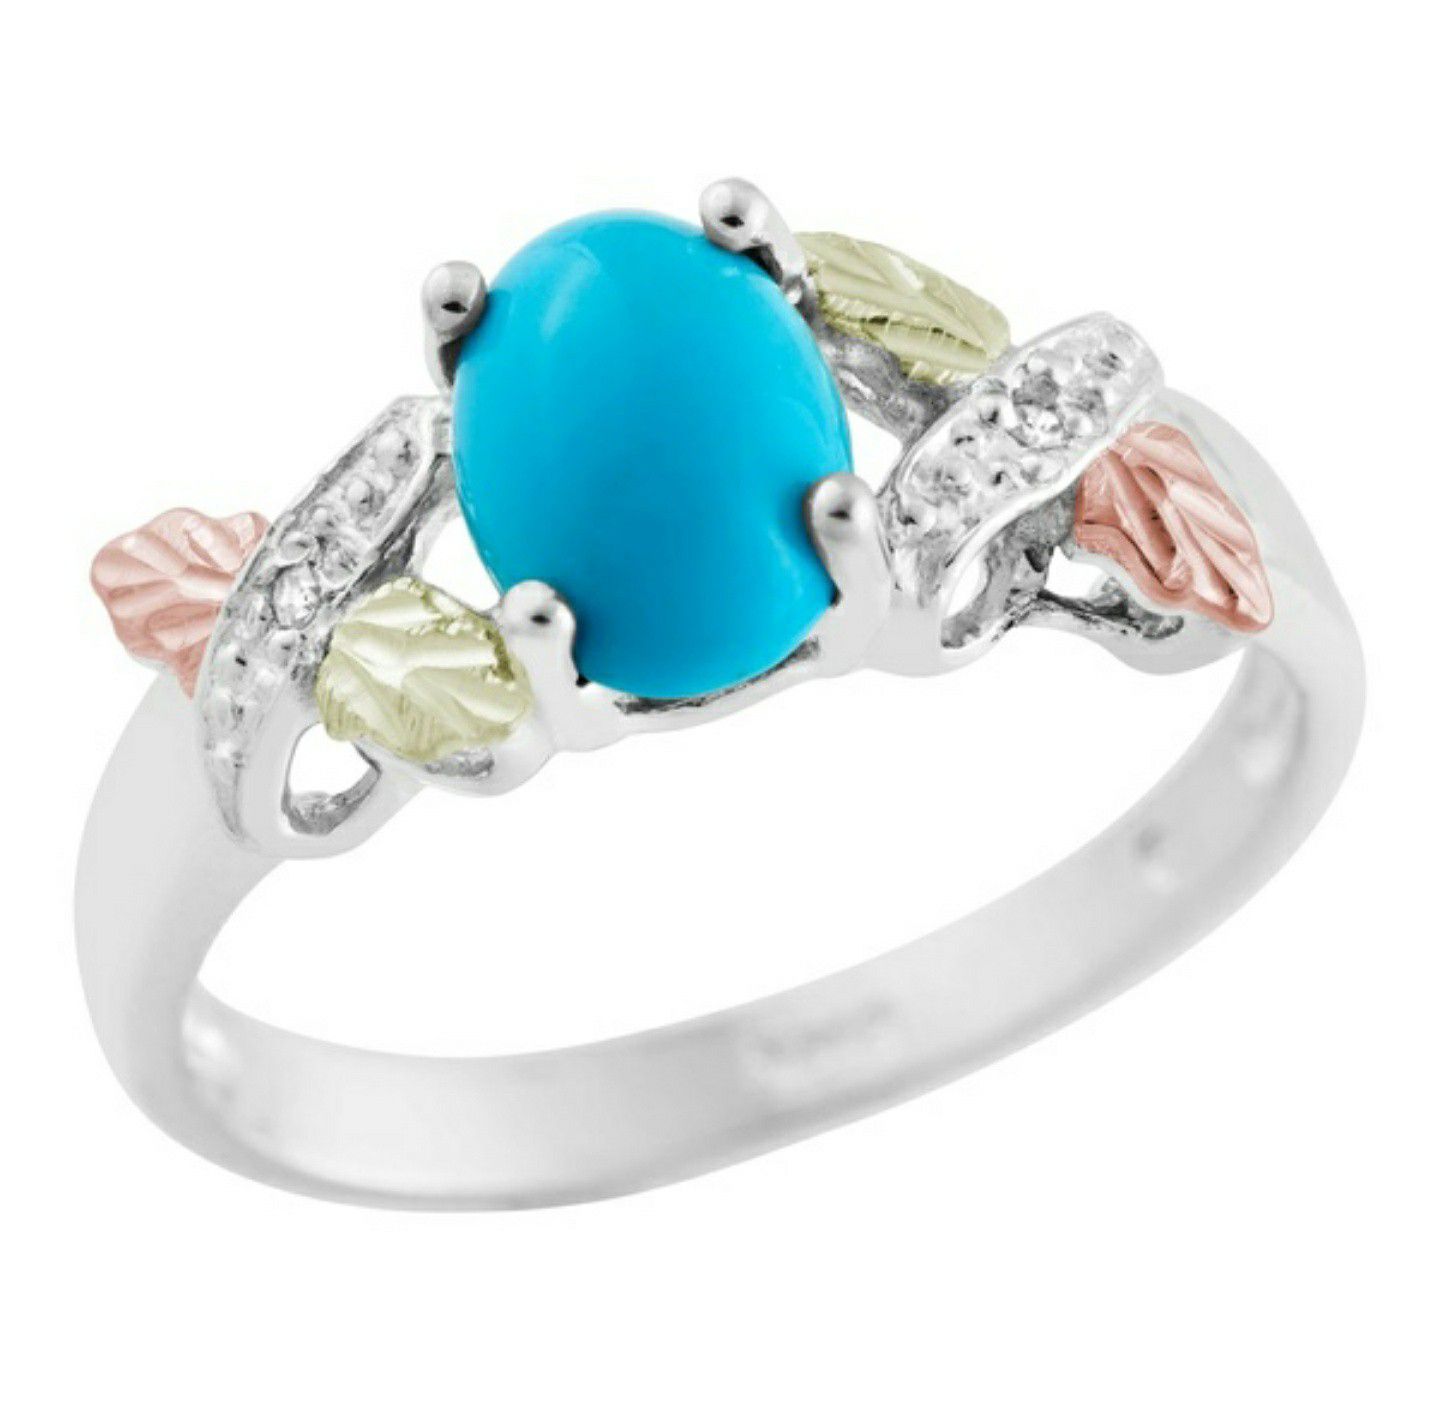 (Shipped Only) Black Hills Gold and Silver Turquoise and Diamond Ring